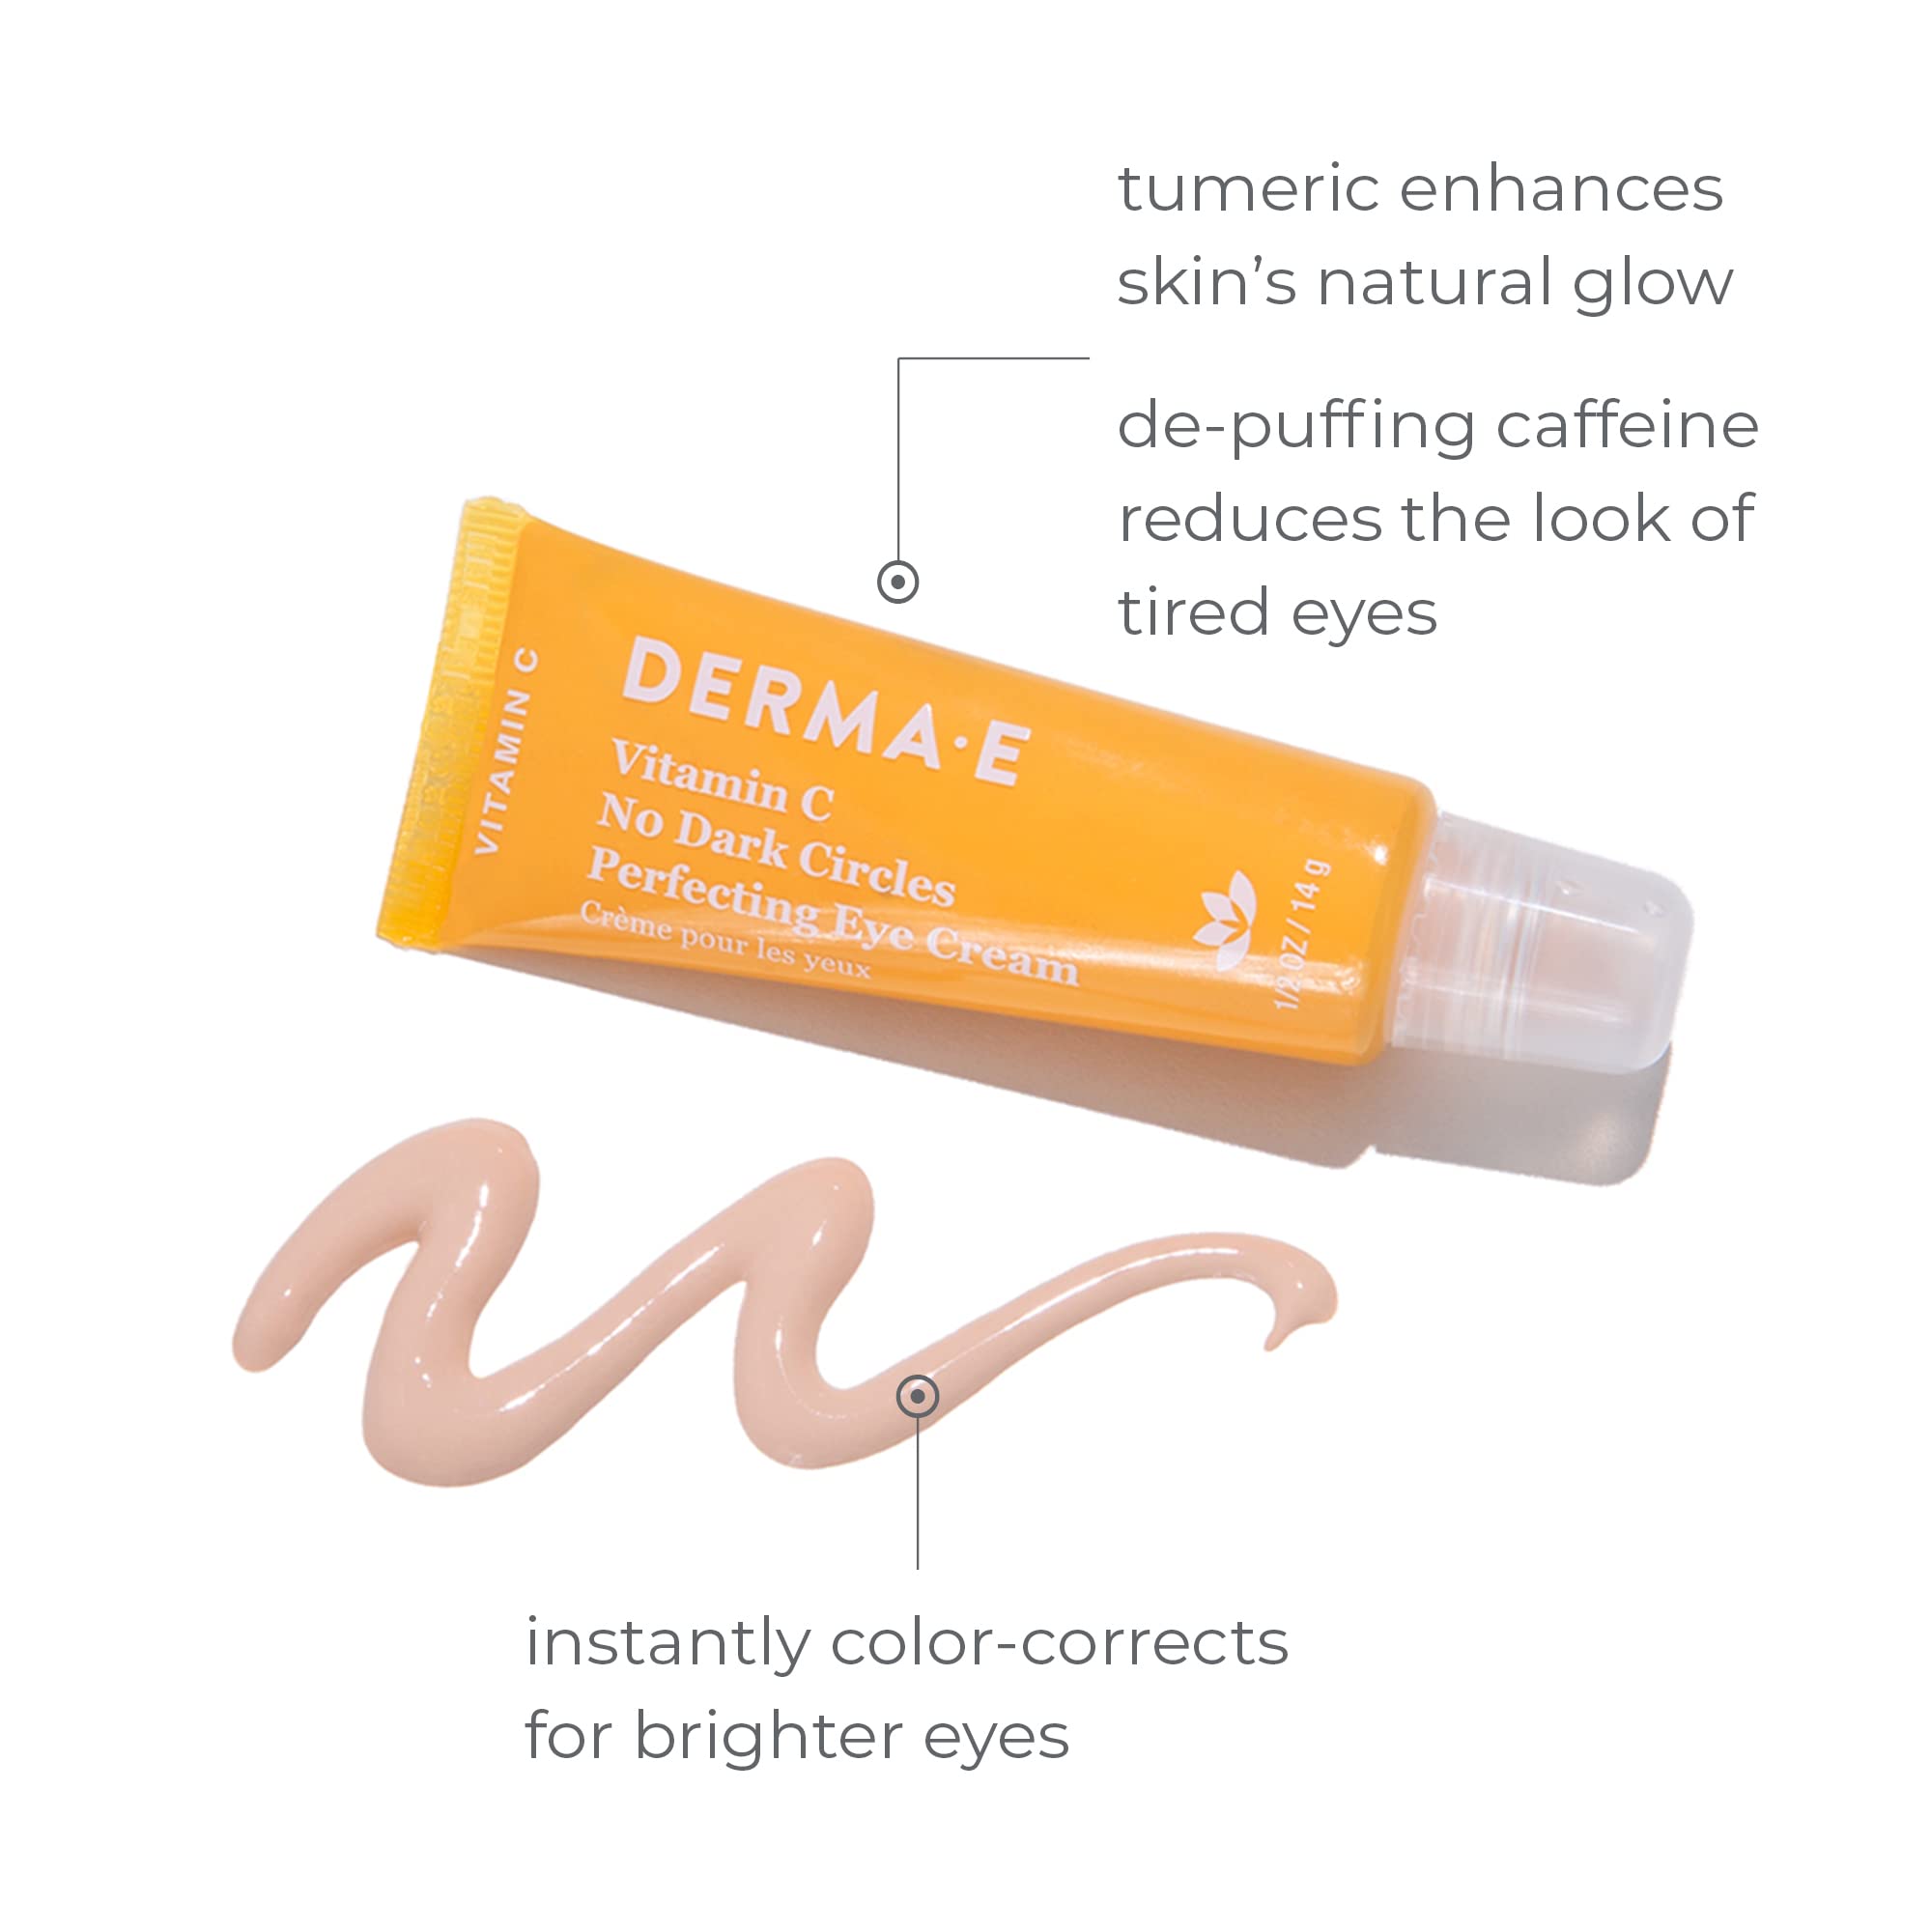 DERMA-E Vitamin C No Dark Circles Perfecting Eye Cream – Color Correcting Vitamin C Eye Cream with Turmeric and Caffeine for Fine Lines and Under Eye Puffiness, 0.5 Oz